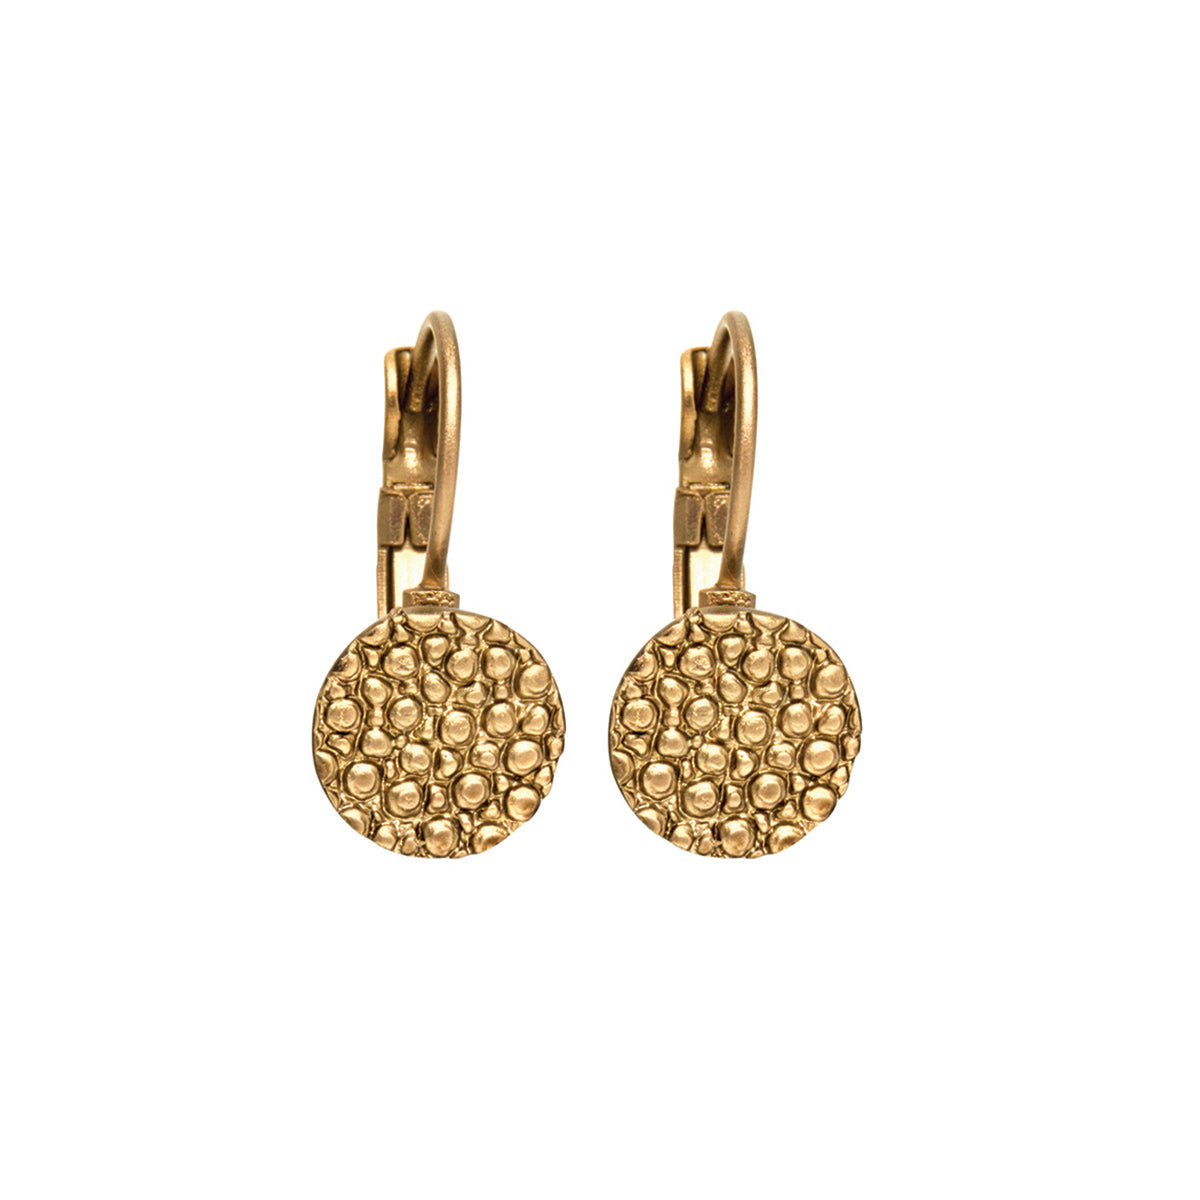 Dansk - Trixie gold colour ion plated earrings with surgical steel posts